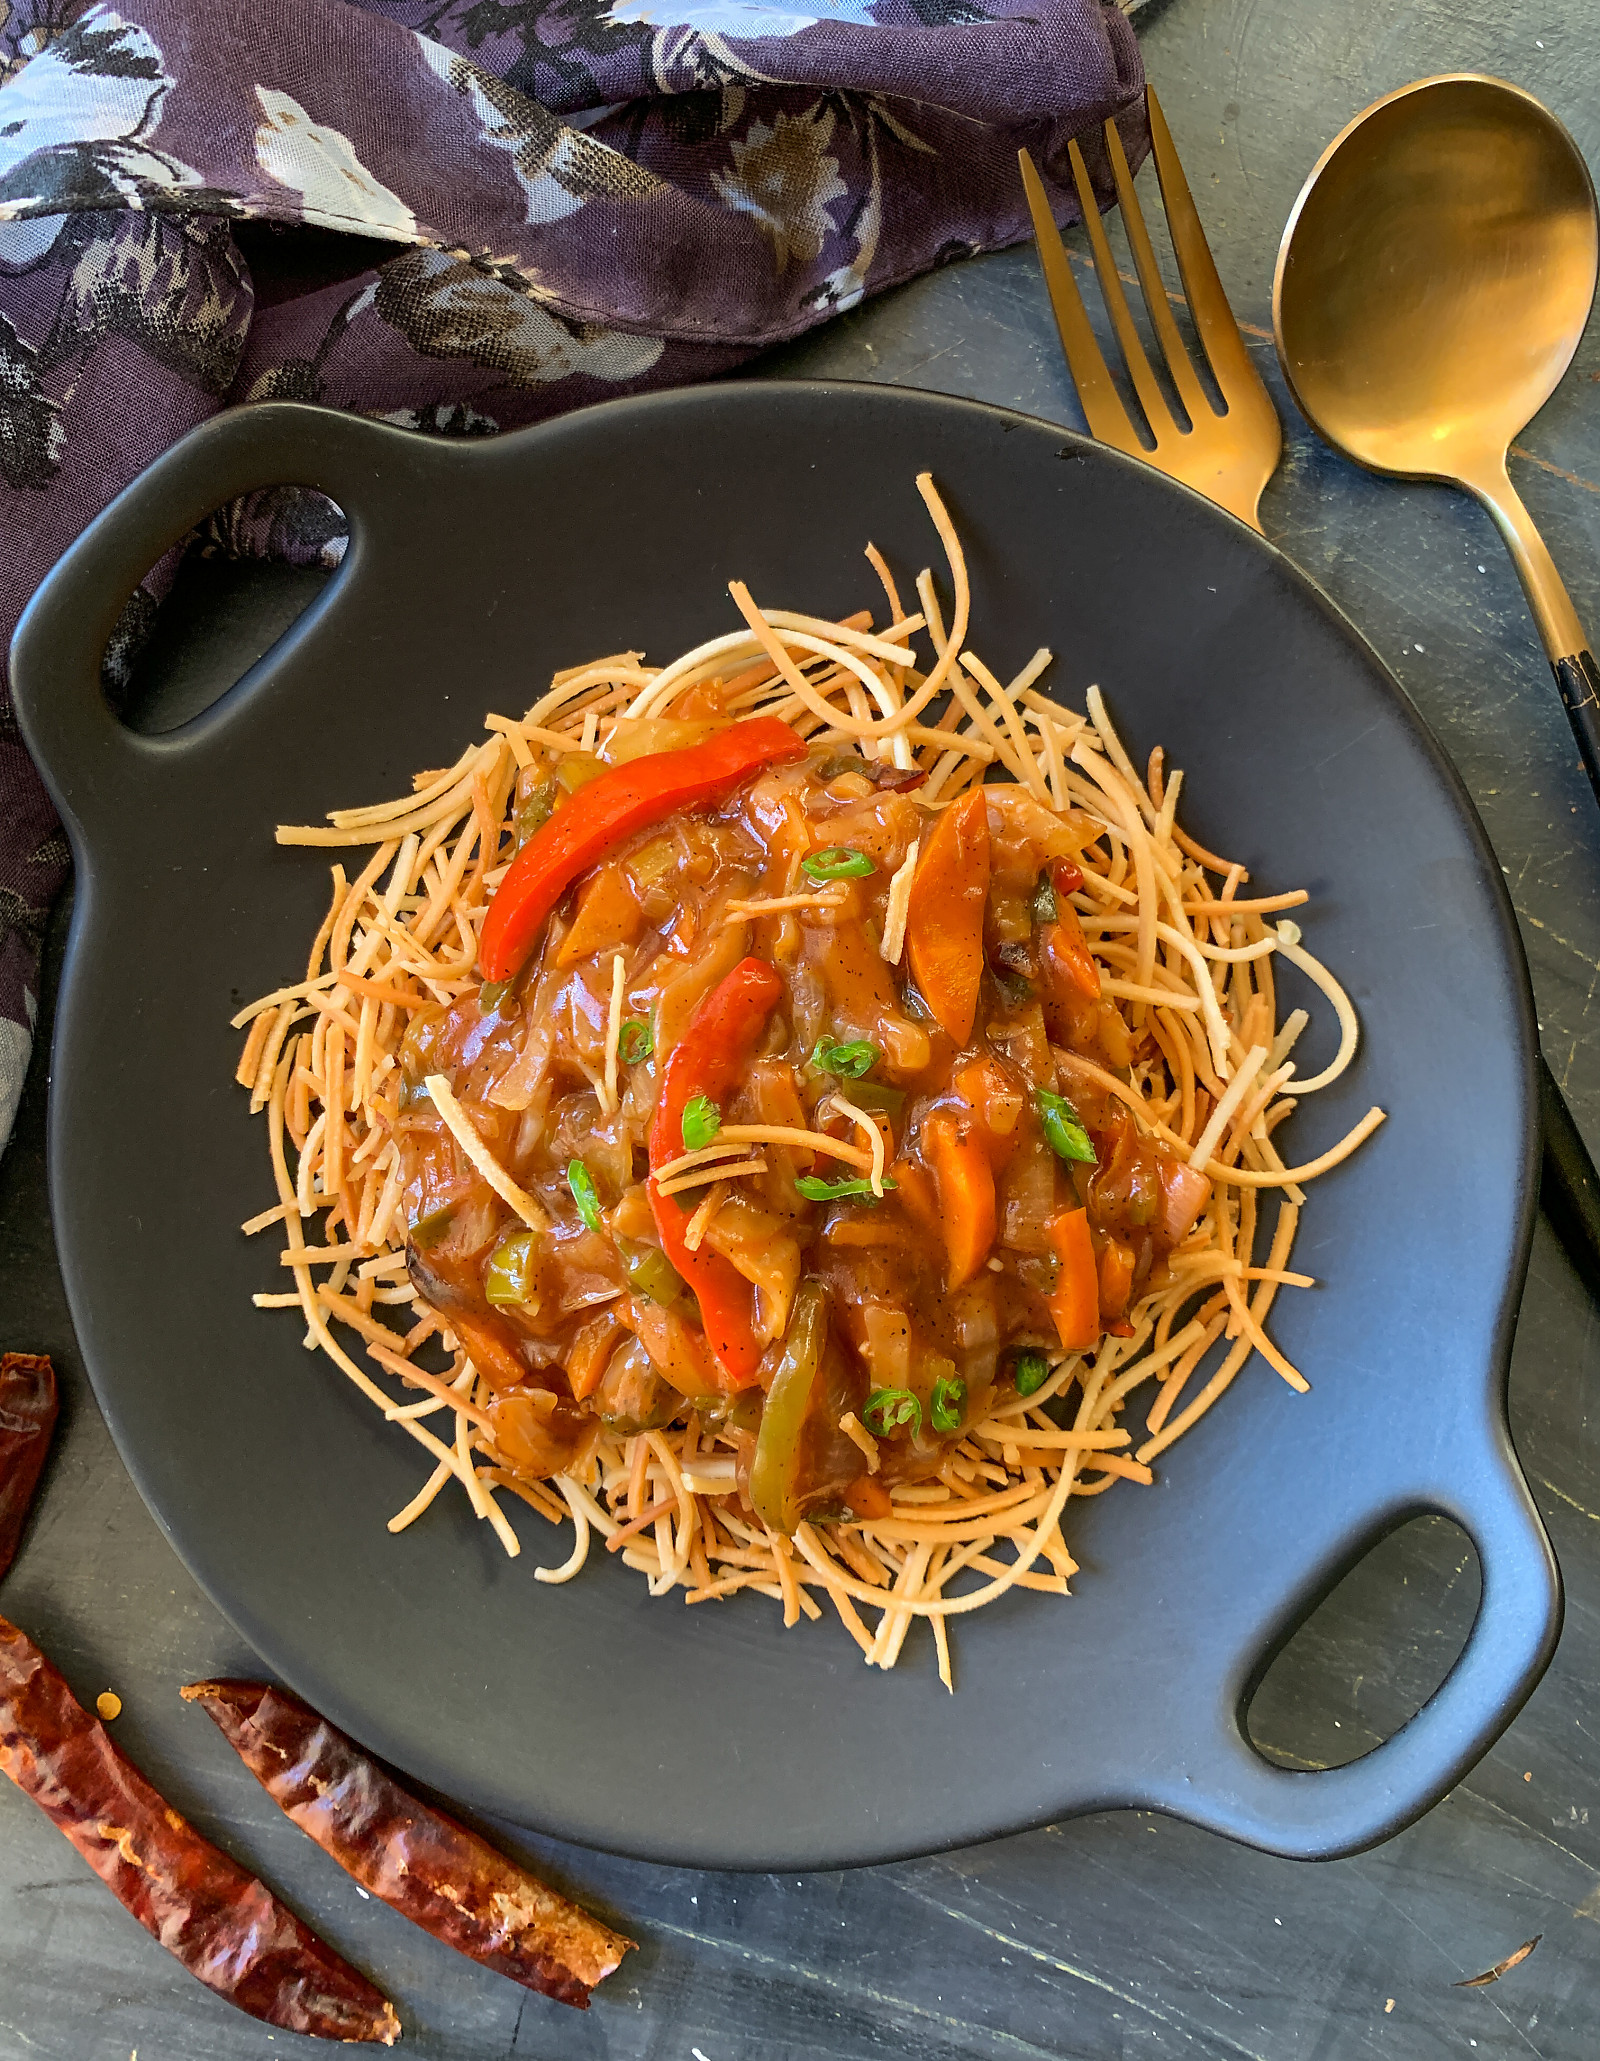 American Chop Suey Recipe With Sweet and Sour Vegetables | Using Millet Noodles